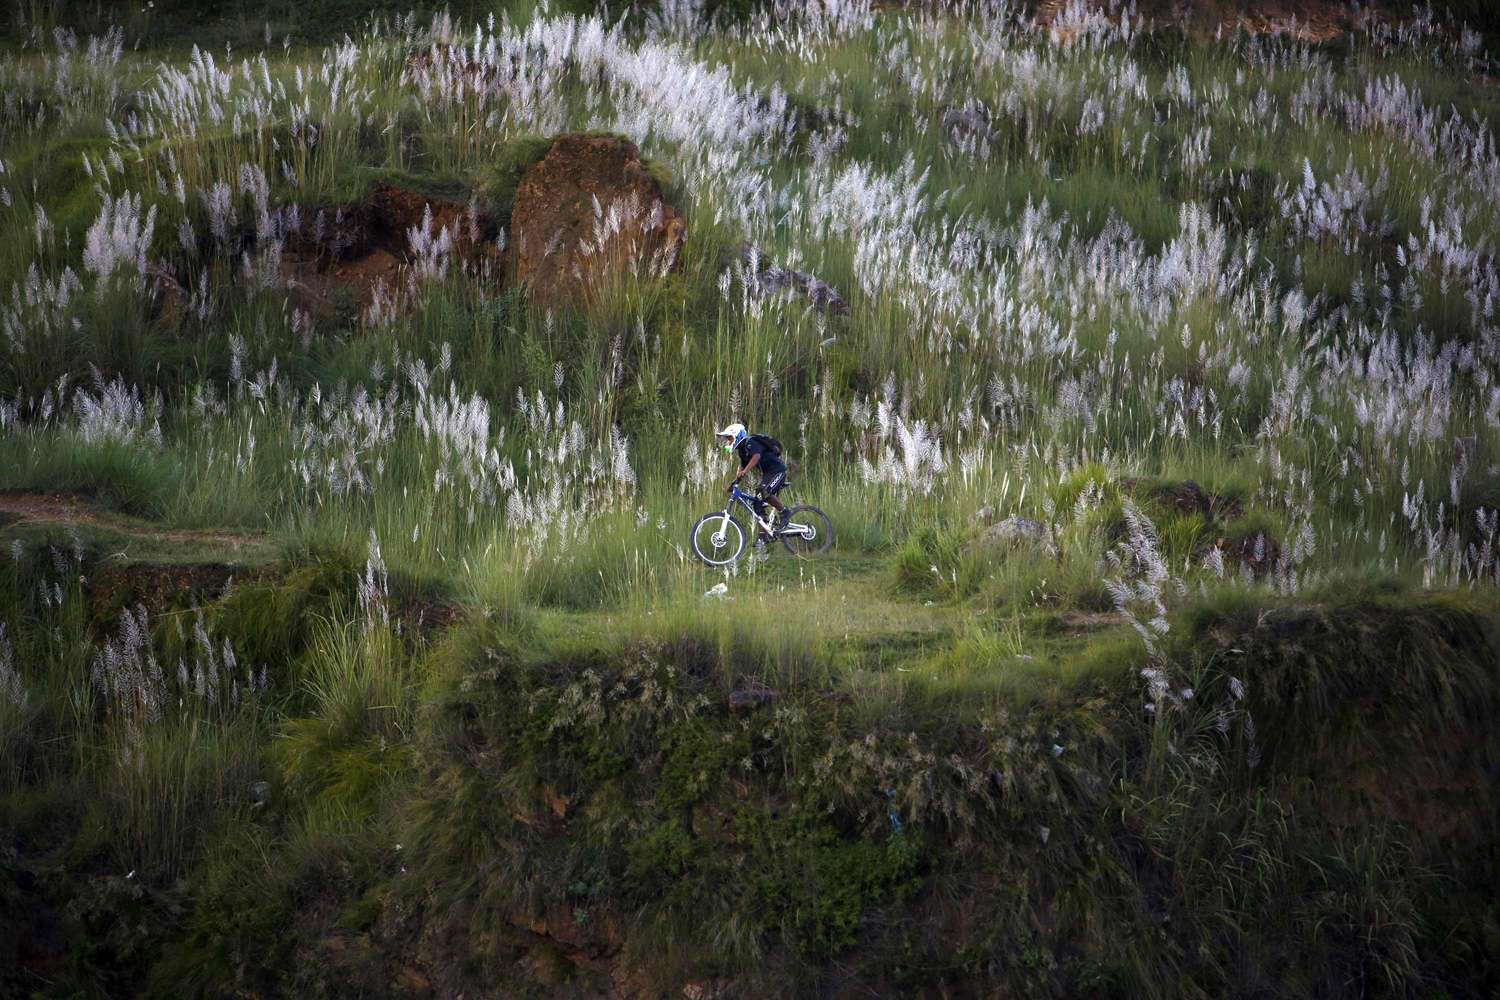 A youth rides a bicycle on the hills in Kathmandu, Nepal on Sept. 3, 2014.